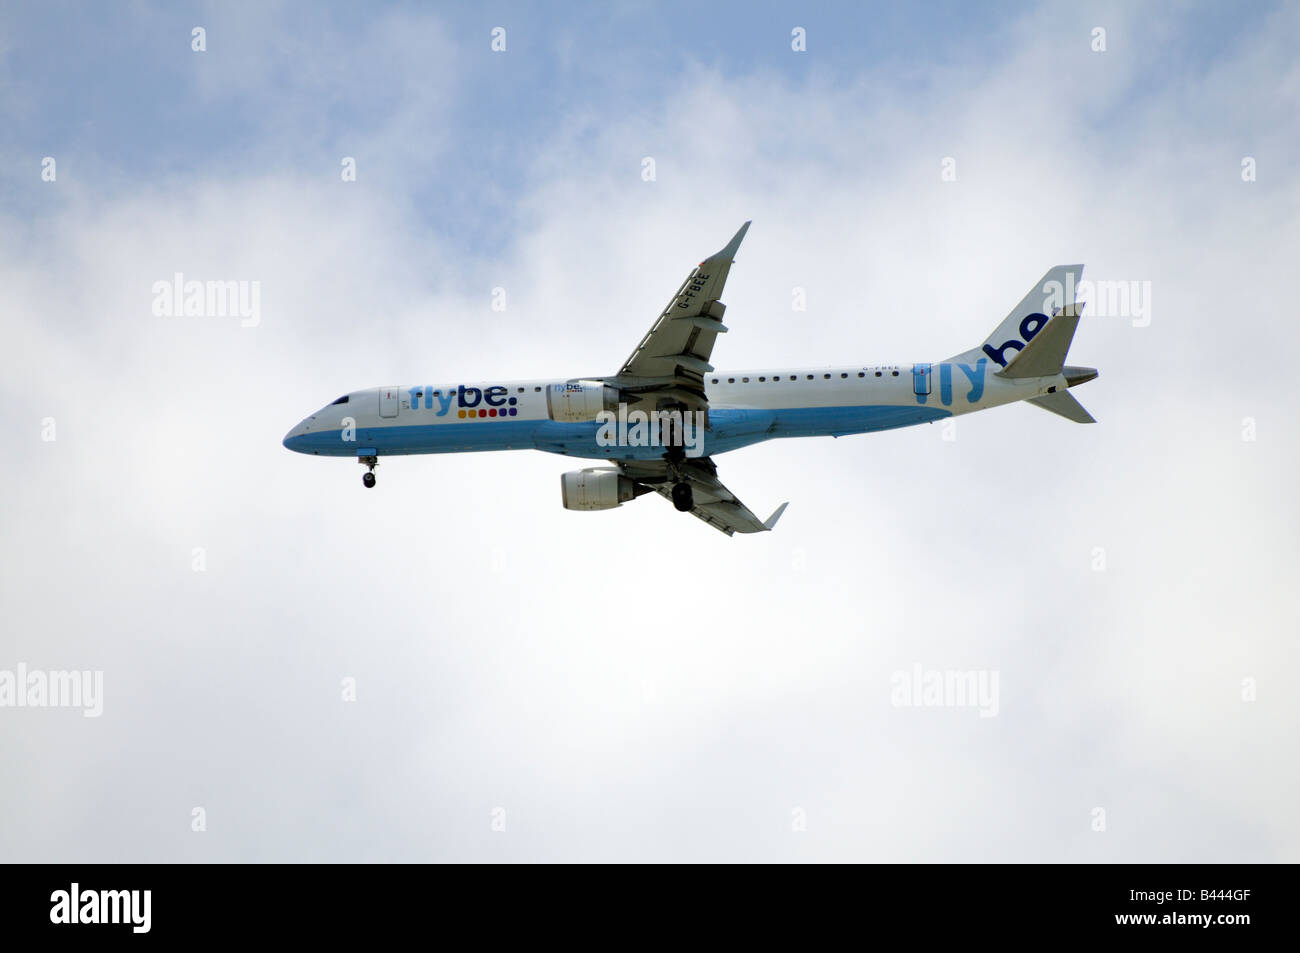 Flybe company Embraer 195 200 passenger jet on finals and approaching its Southampton base Stock Photo